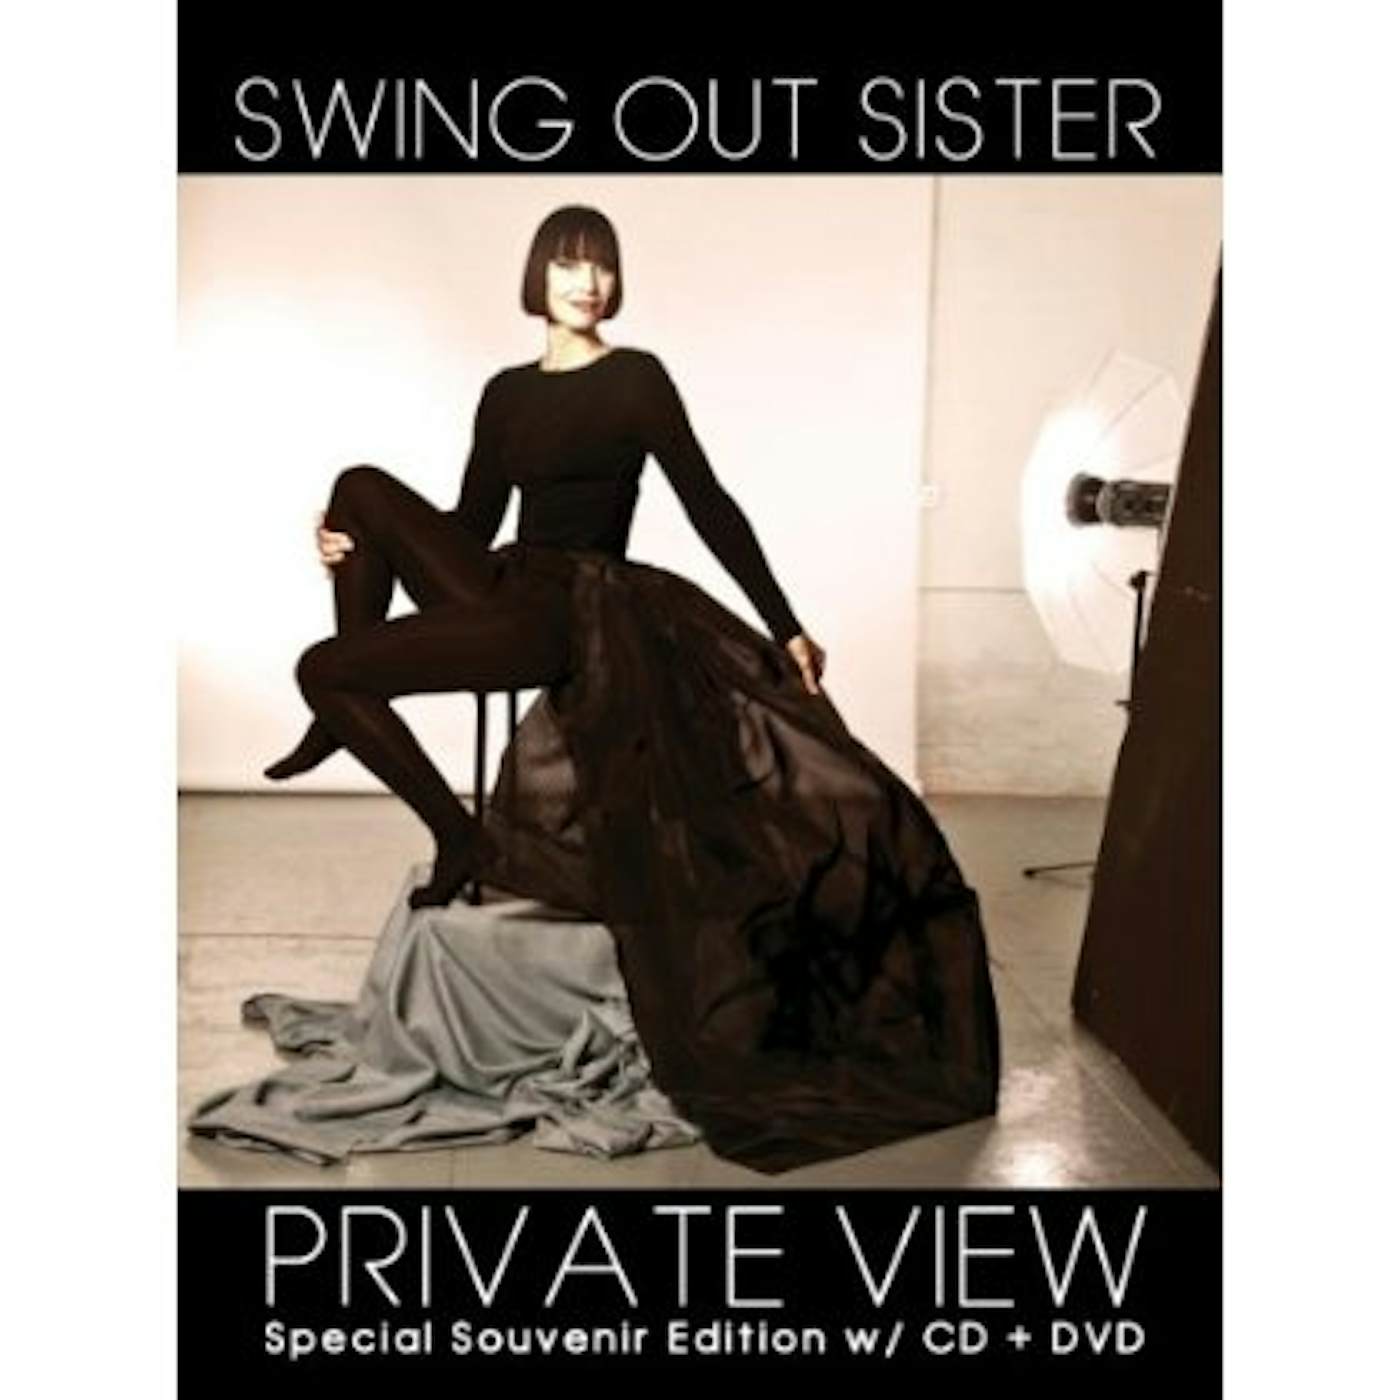 Swing Out Sister PRIVATE VIEW CD